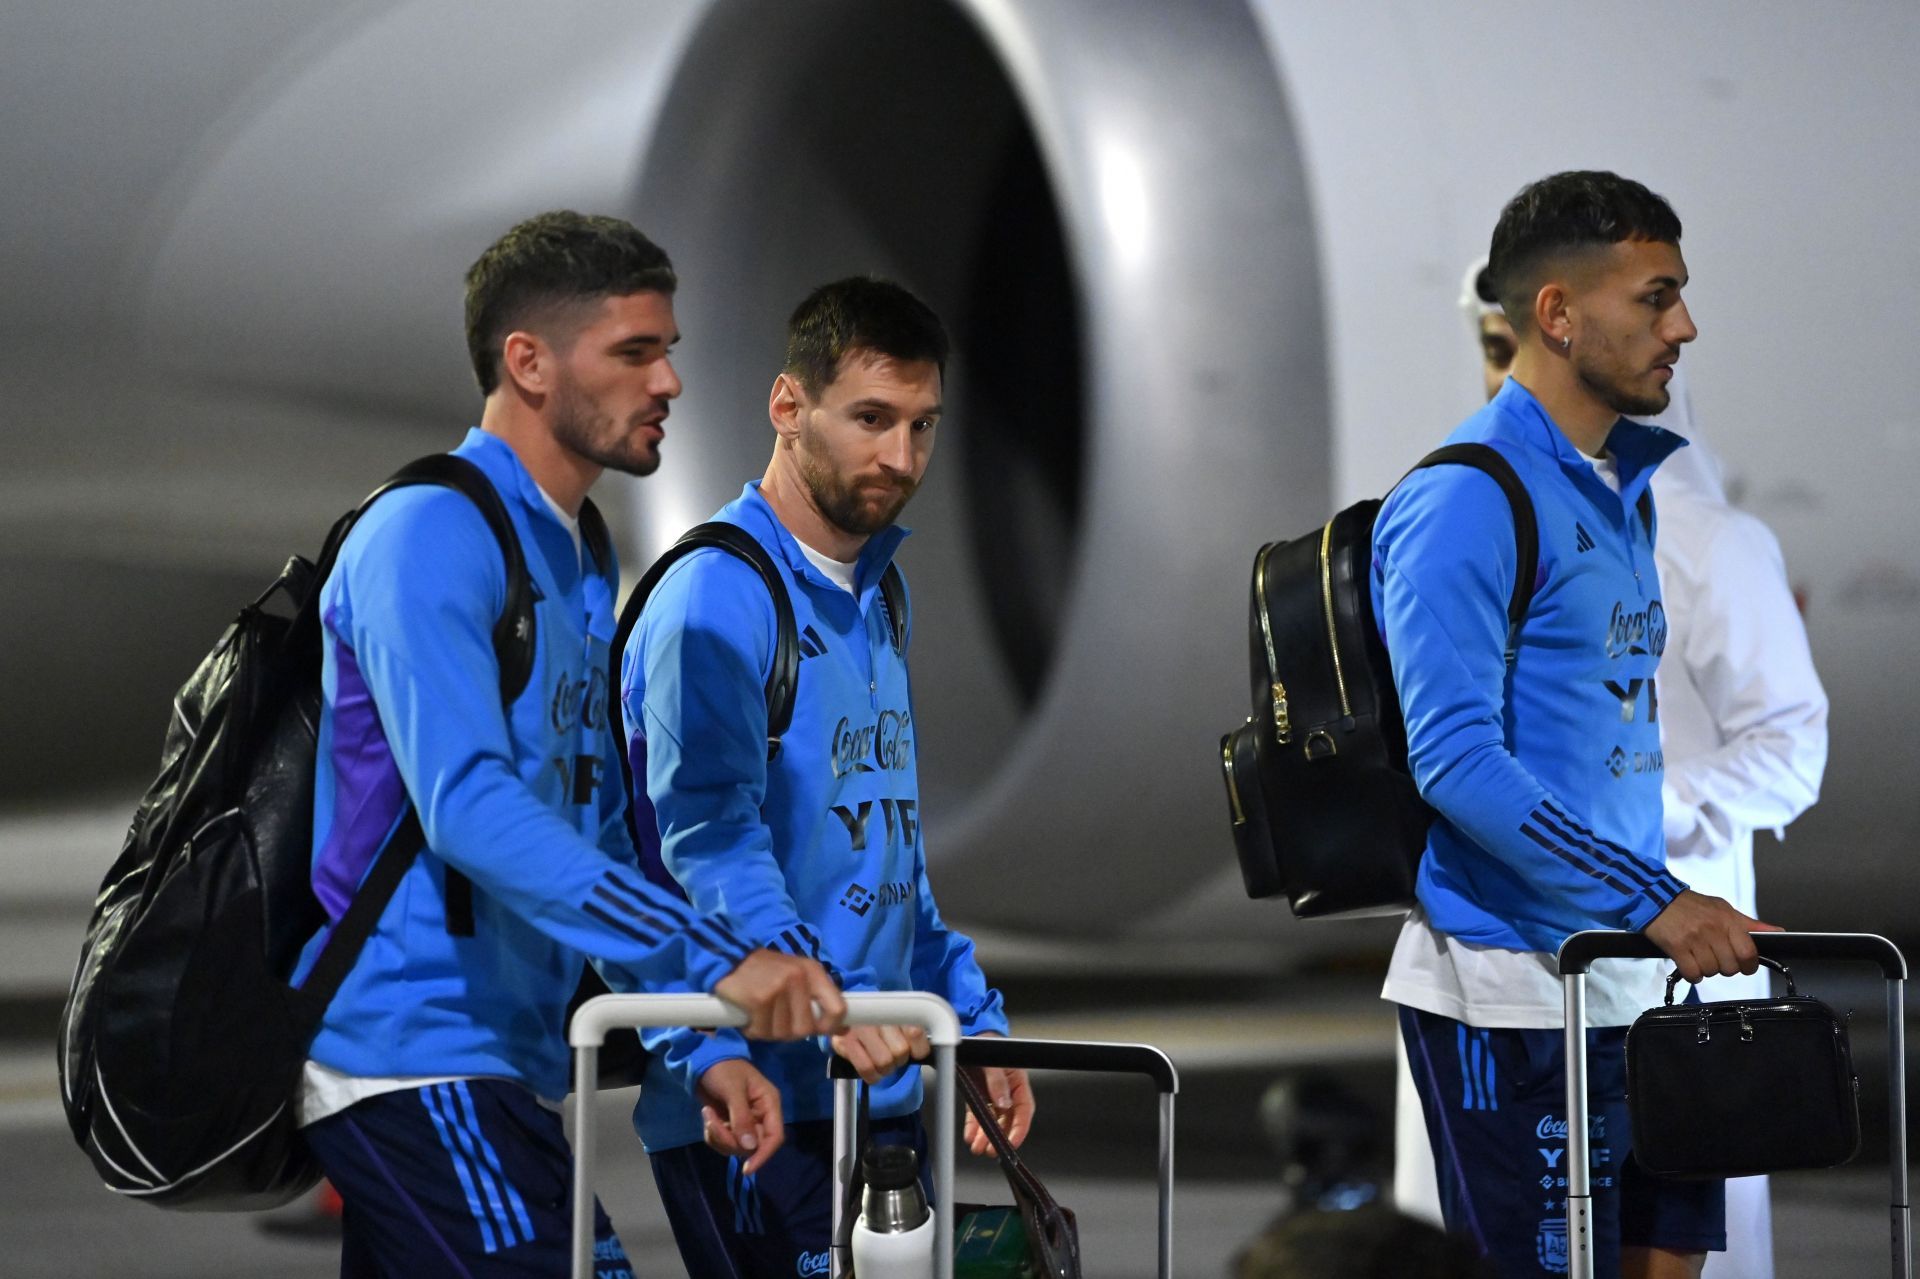 Team Arrival - Argentina: Lione Messi ahead of the 2022 FIFA World Cup